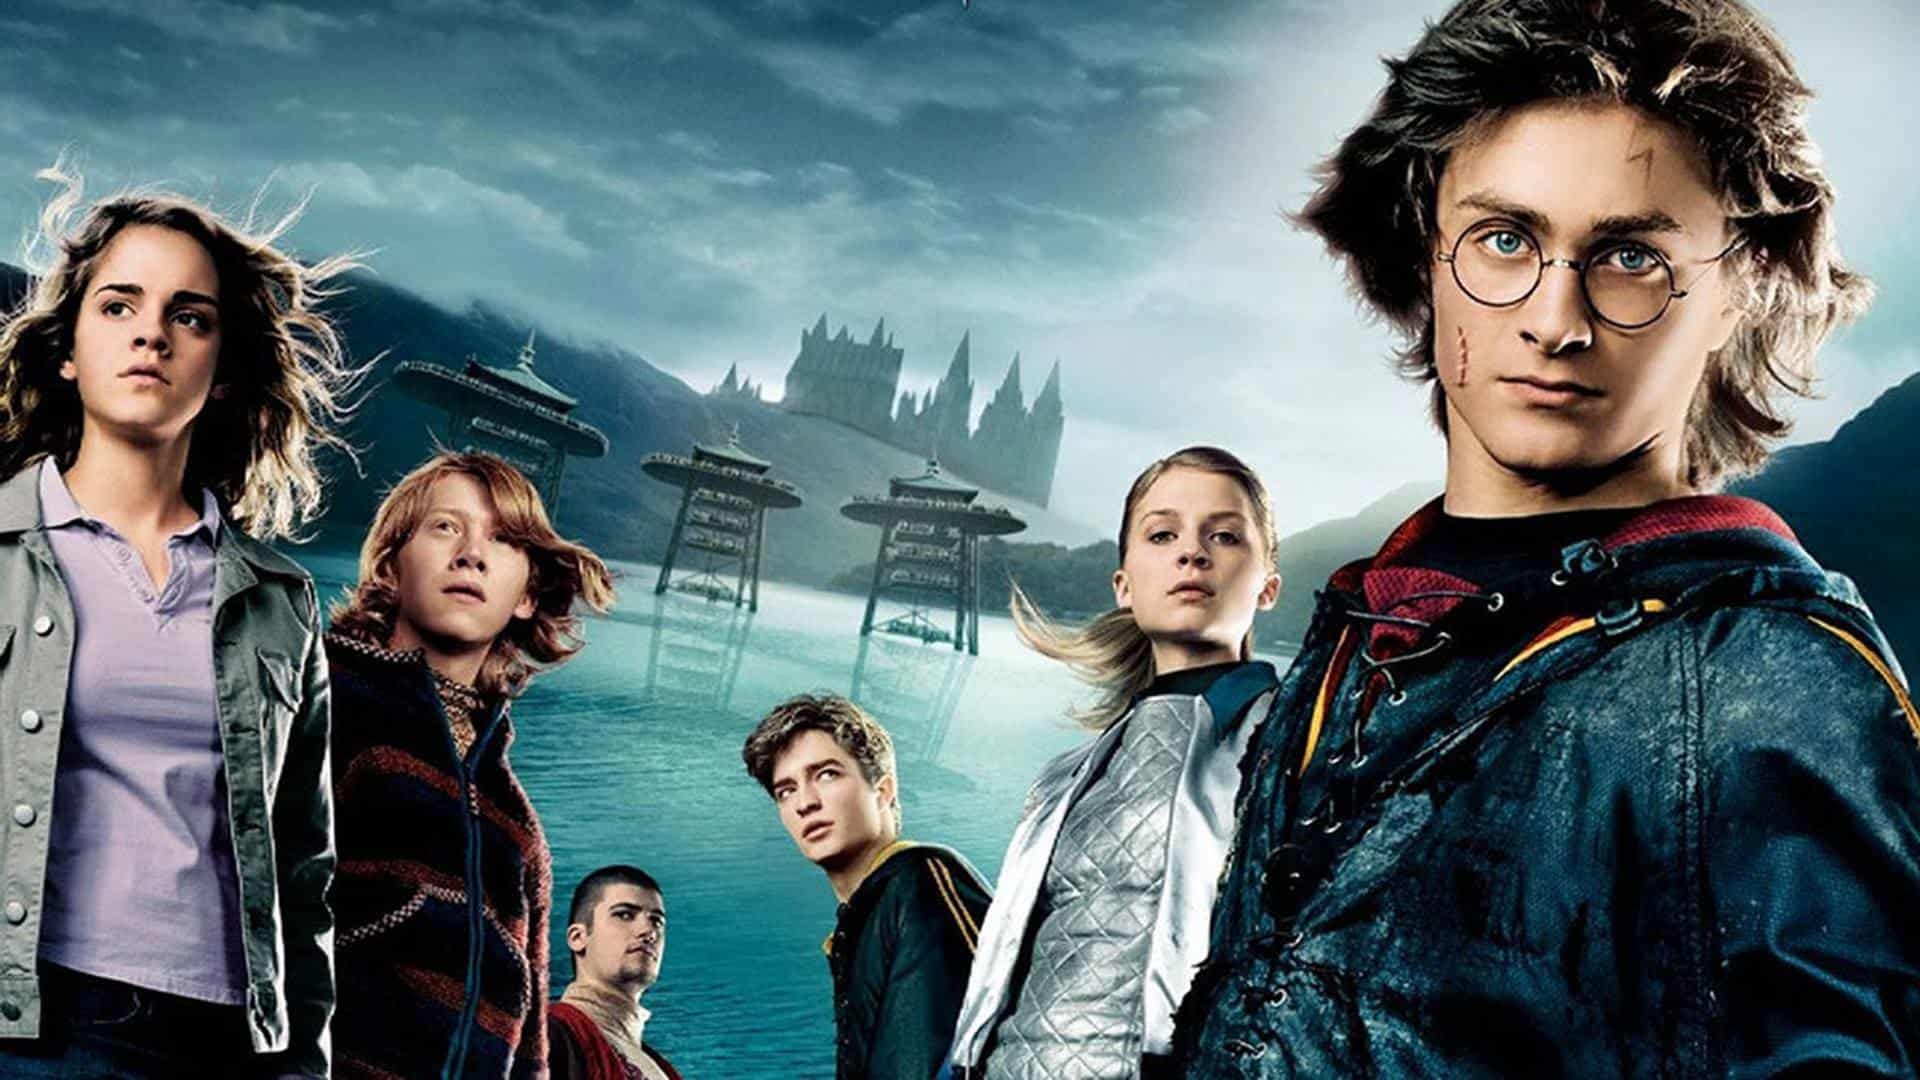 All 8 Harry Potter Movies to Return to Edmonton Theater | October 13-20